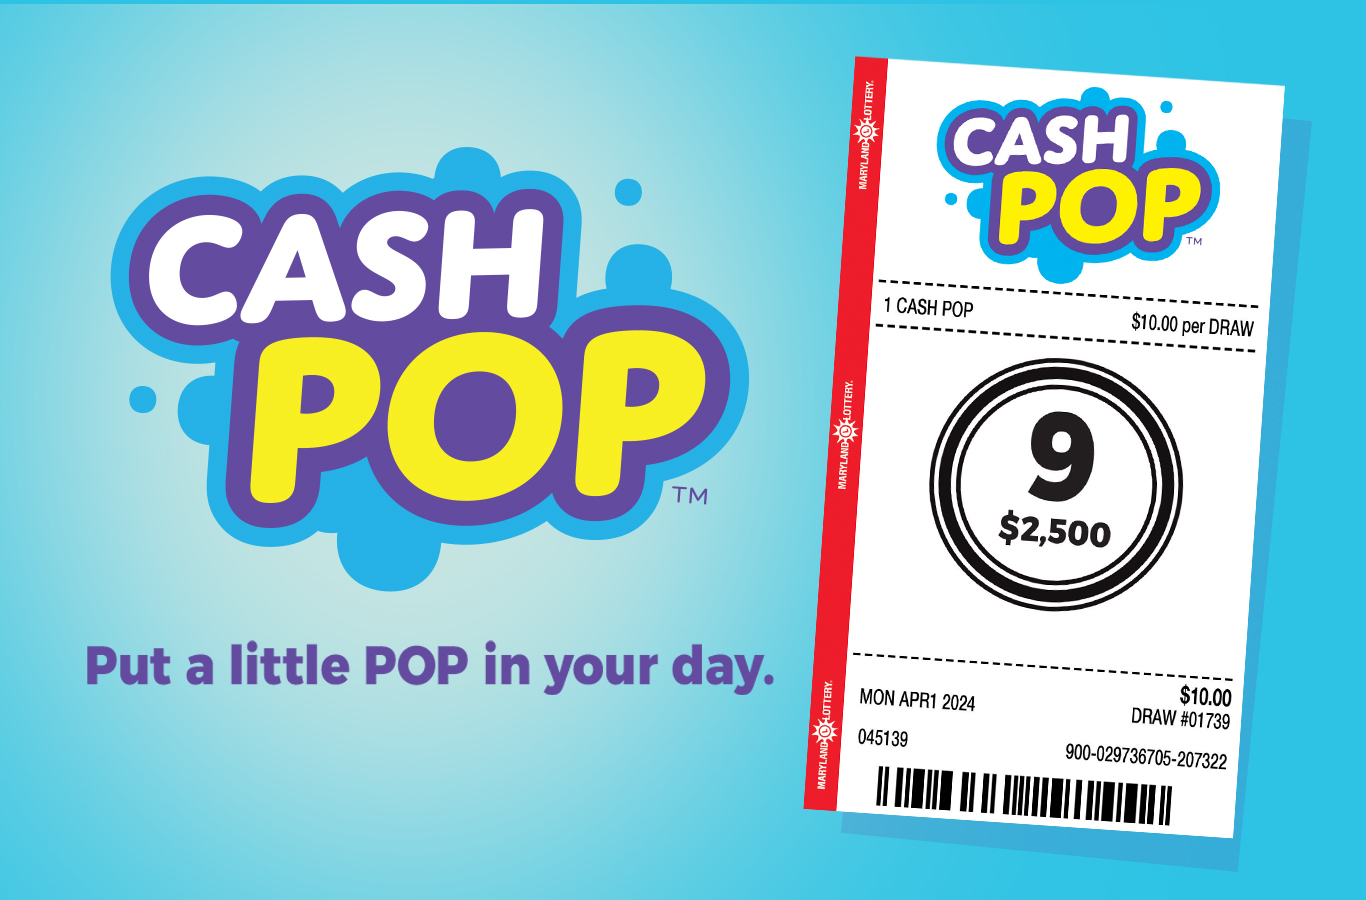 Coming Soon! Put a little POP in your day with CASH POP.